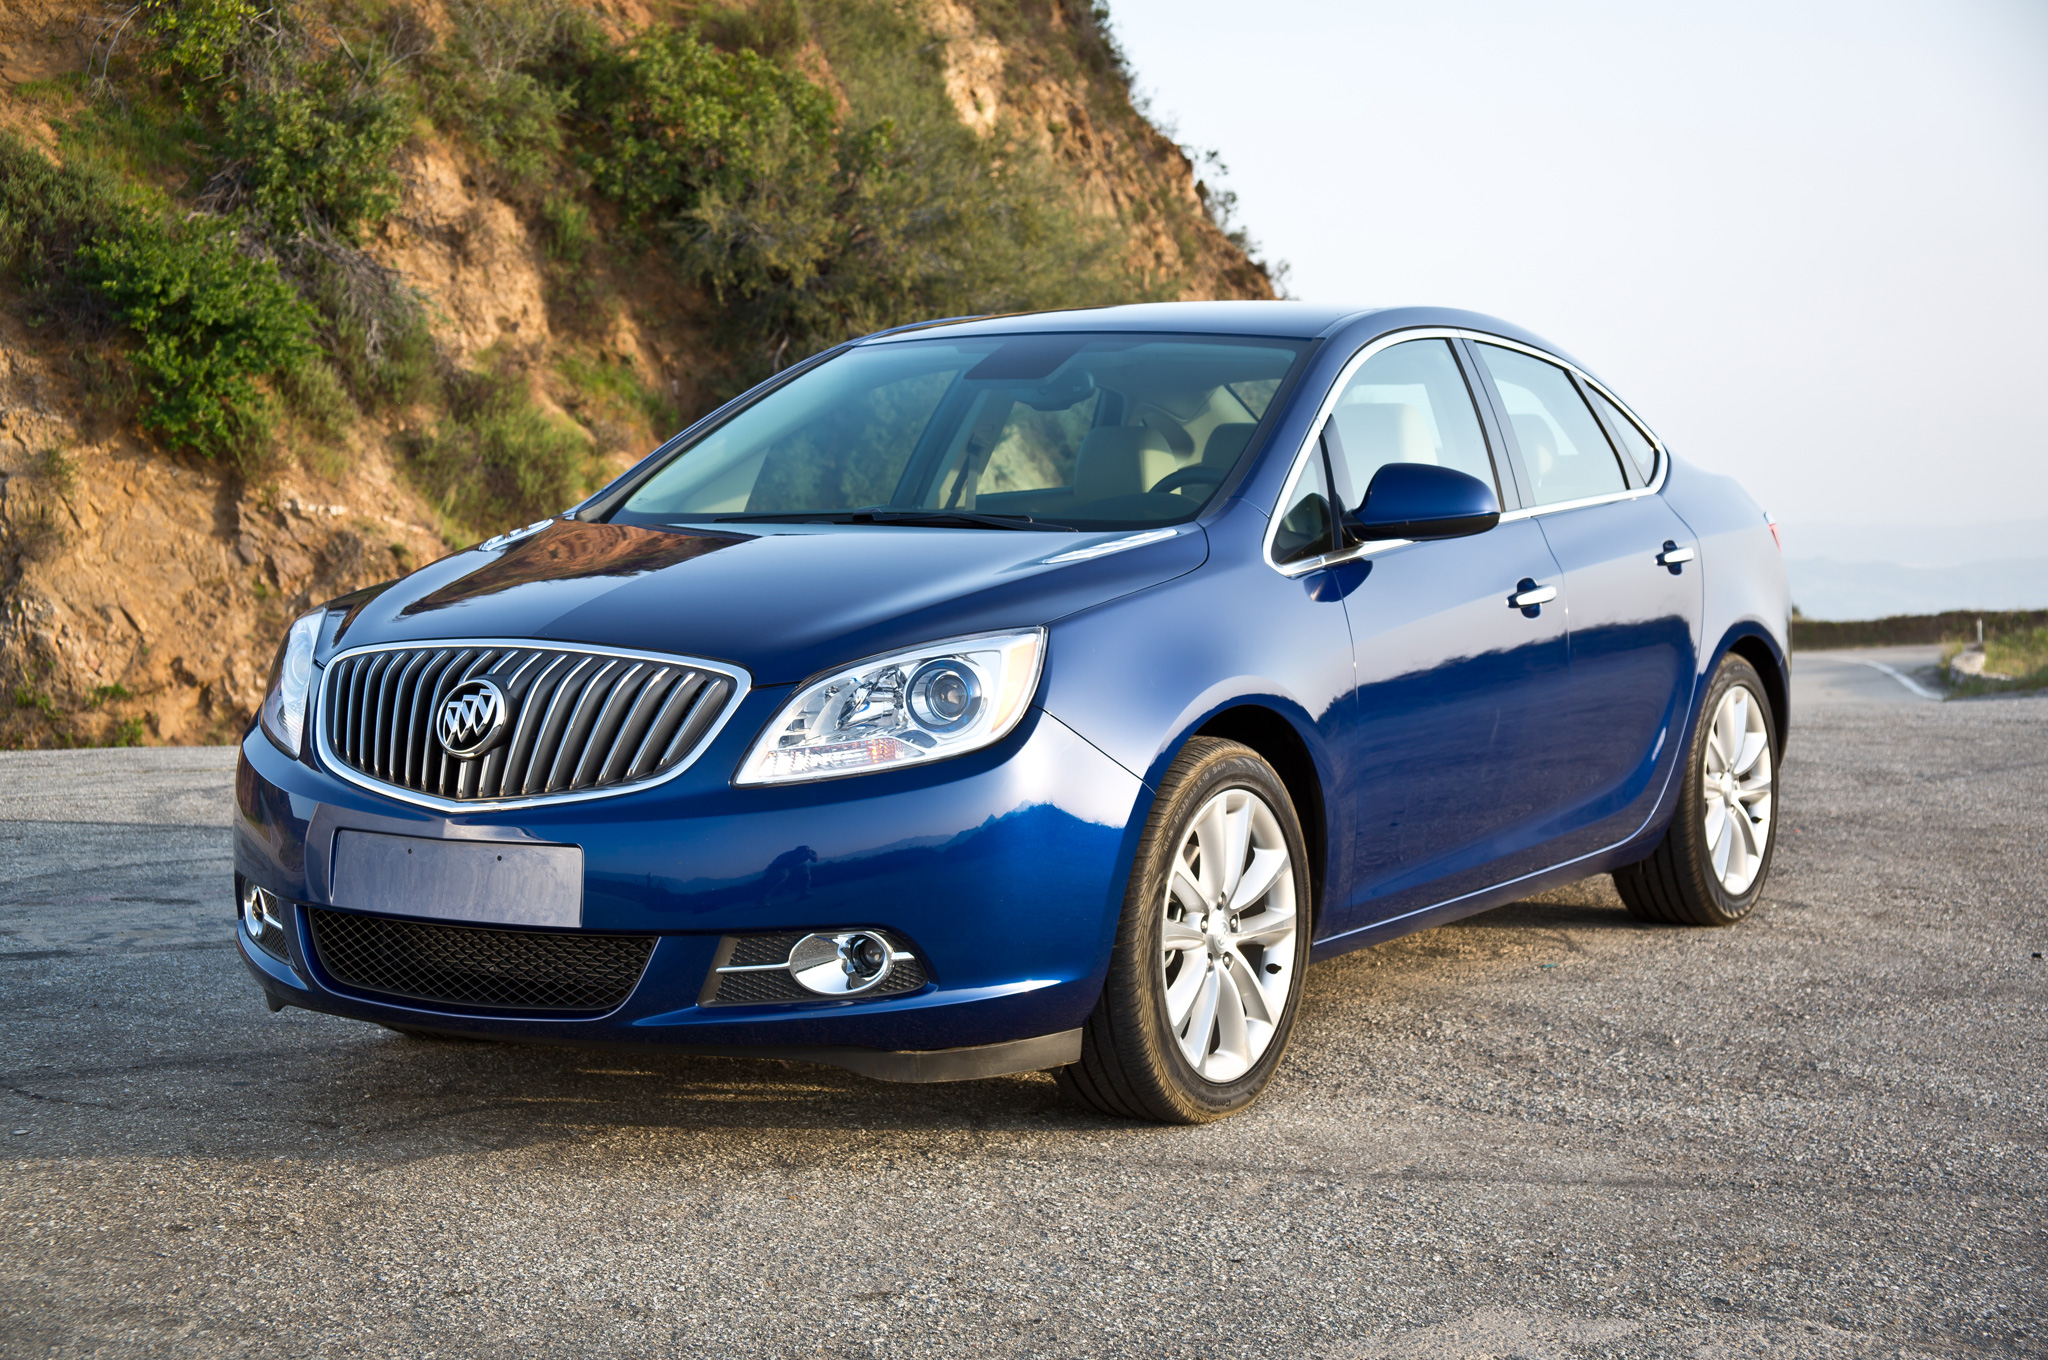 Buick Verano Turbo Backgrounds on Wallpapers Vista